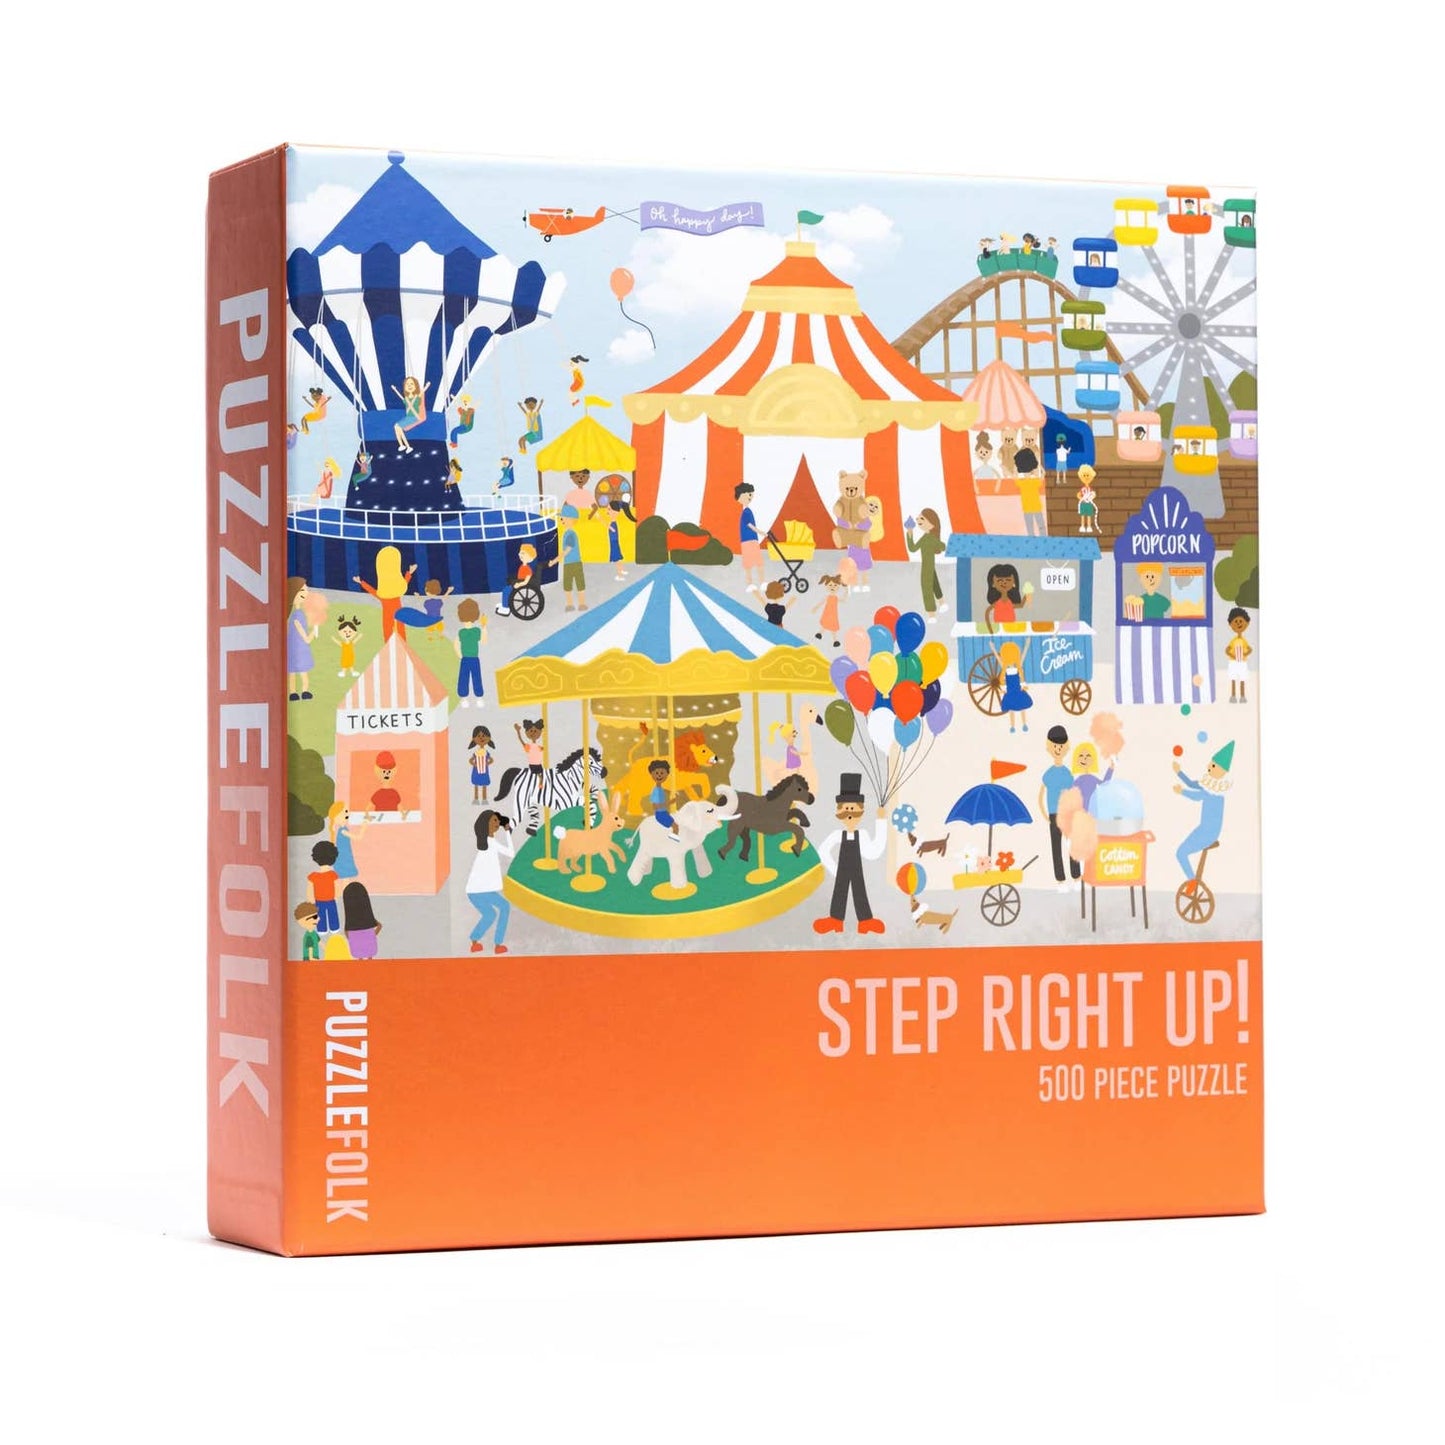 Step Right Up! 500 Piece Puzzle